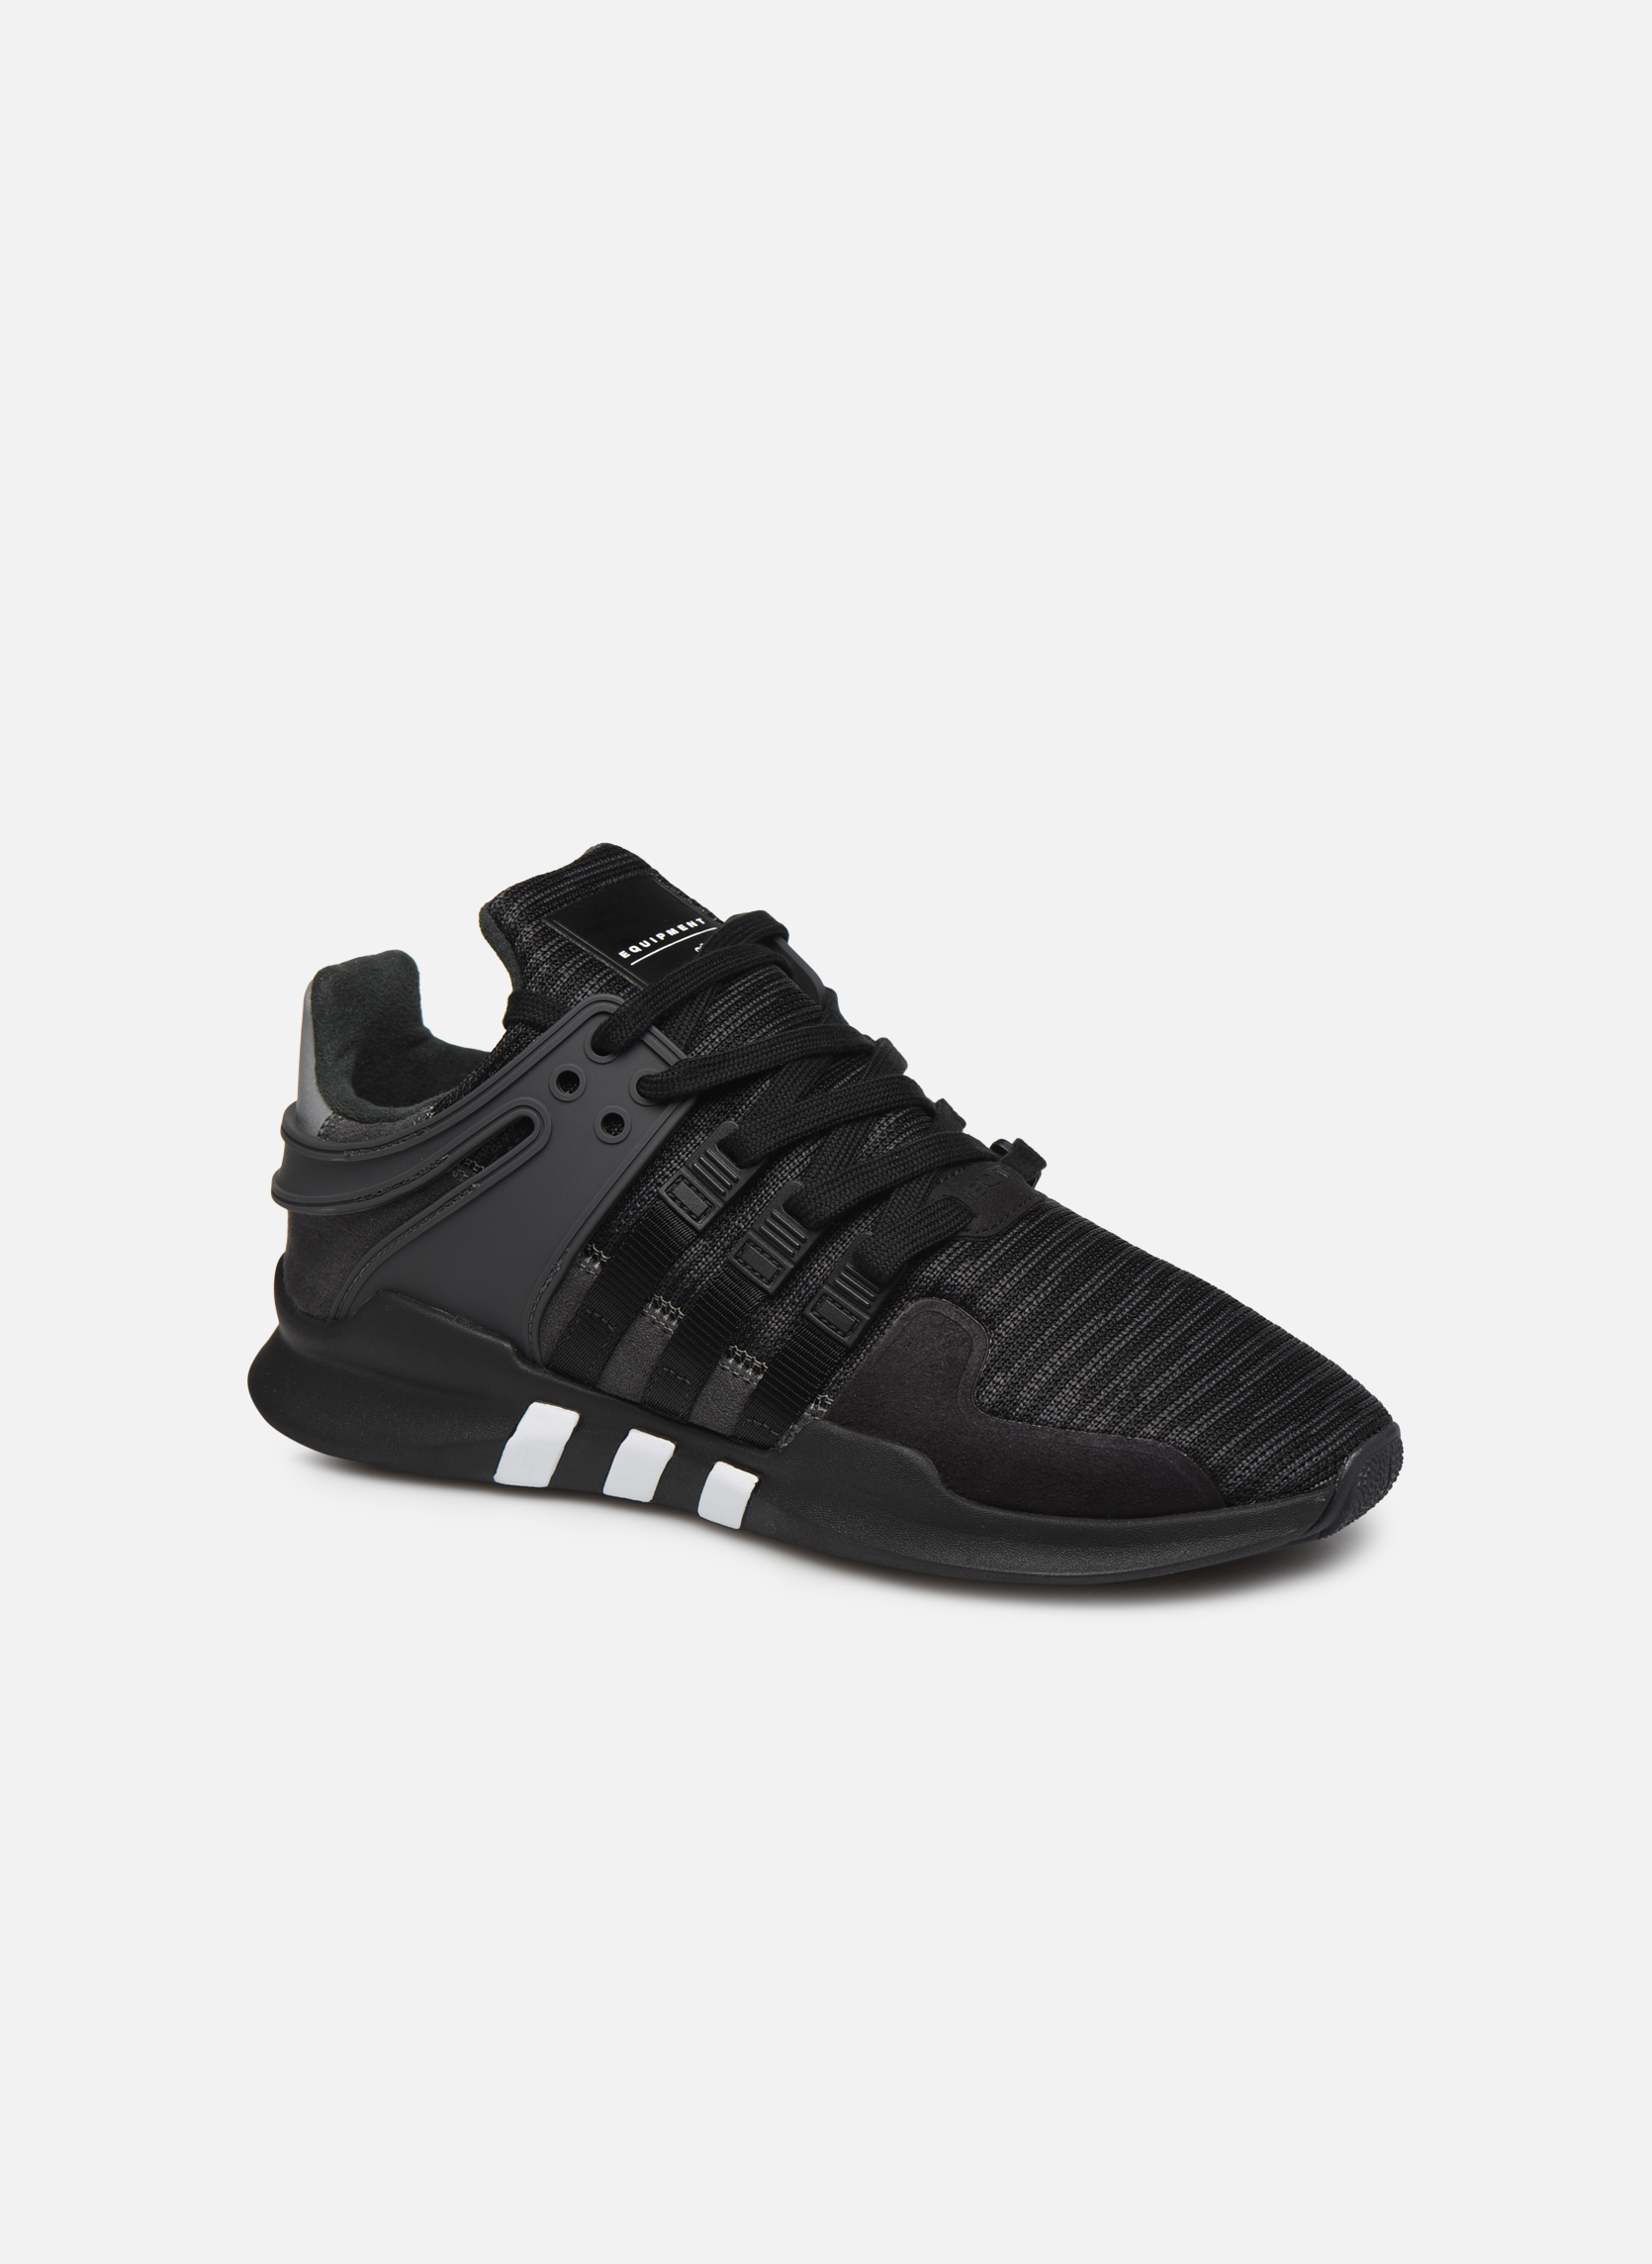 adidas eqt support sock homme or